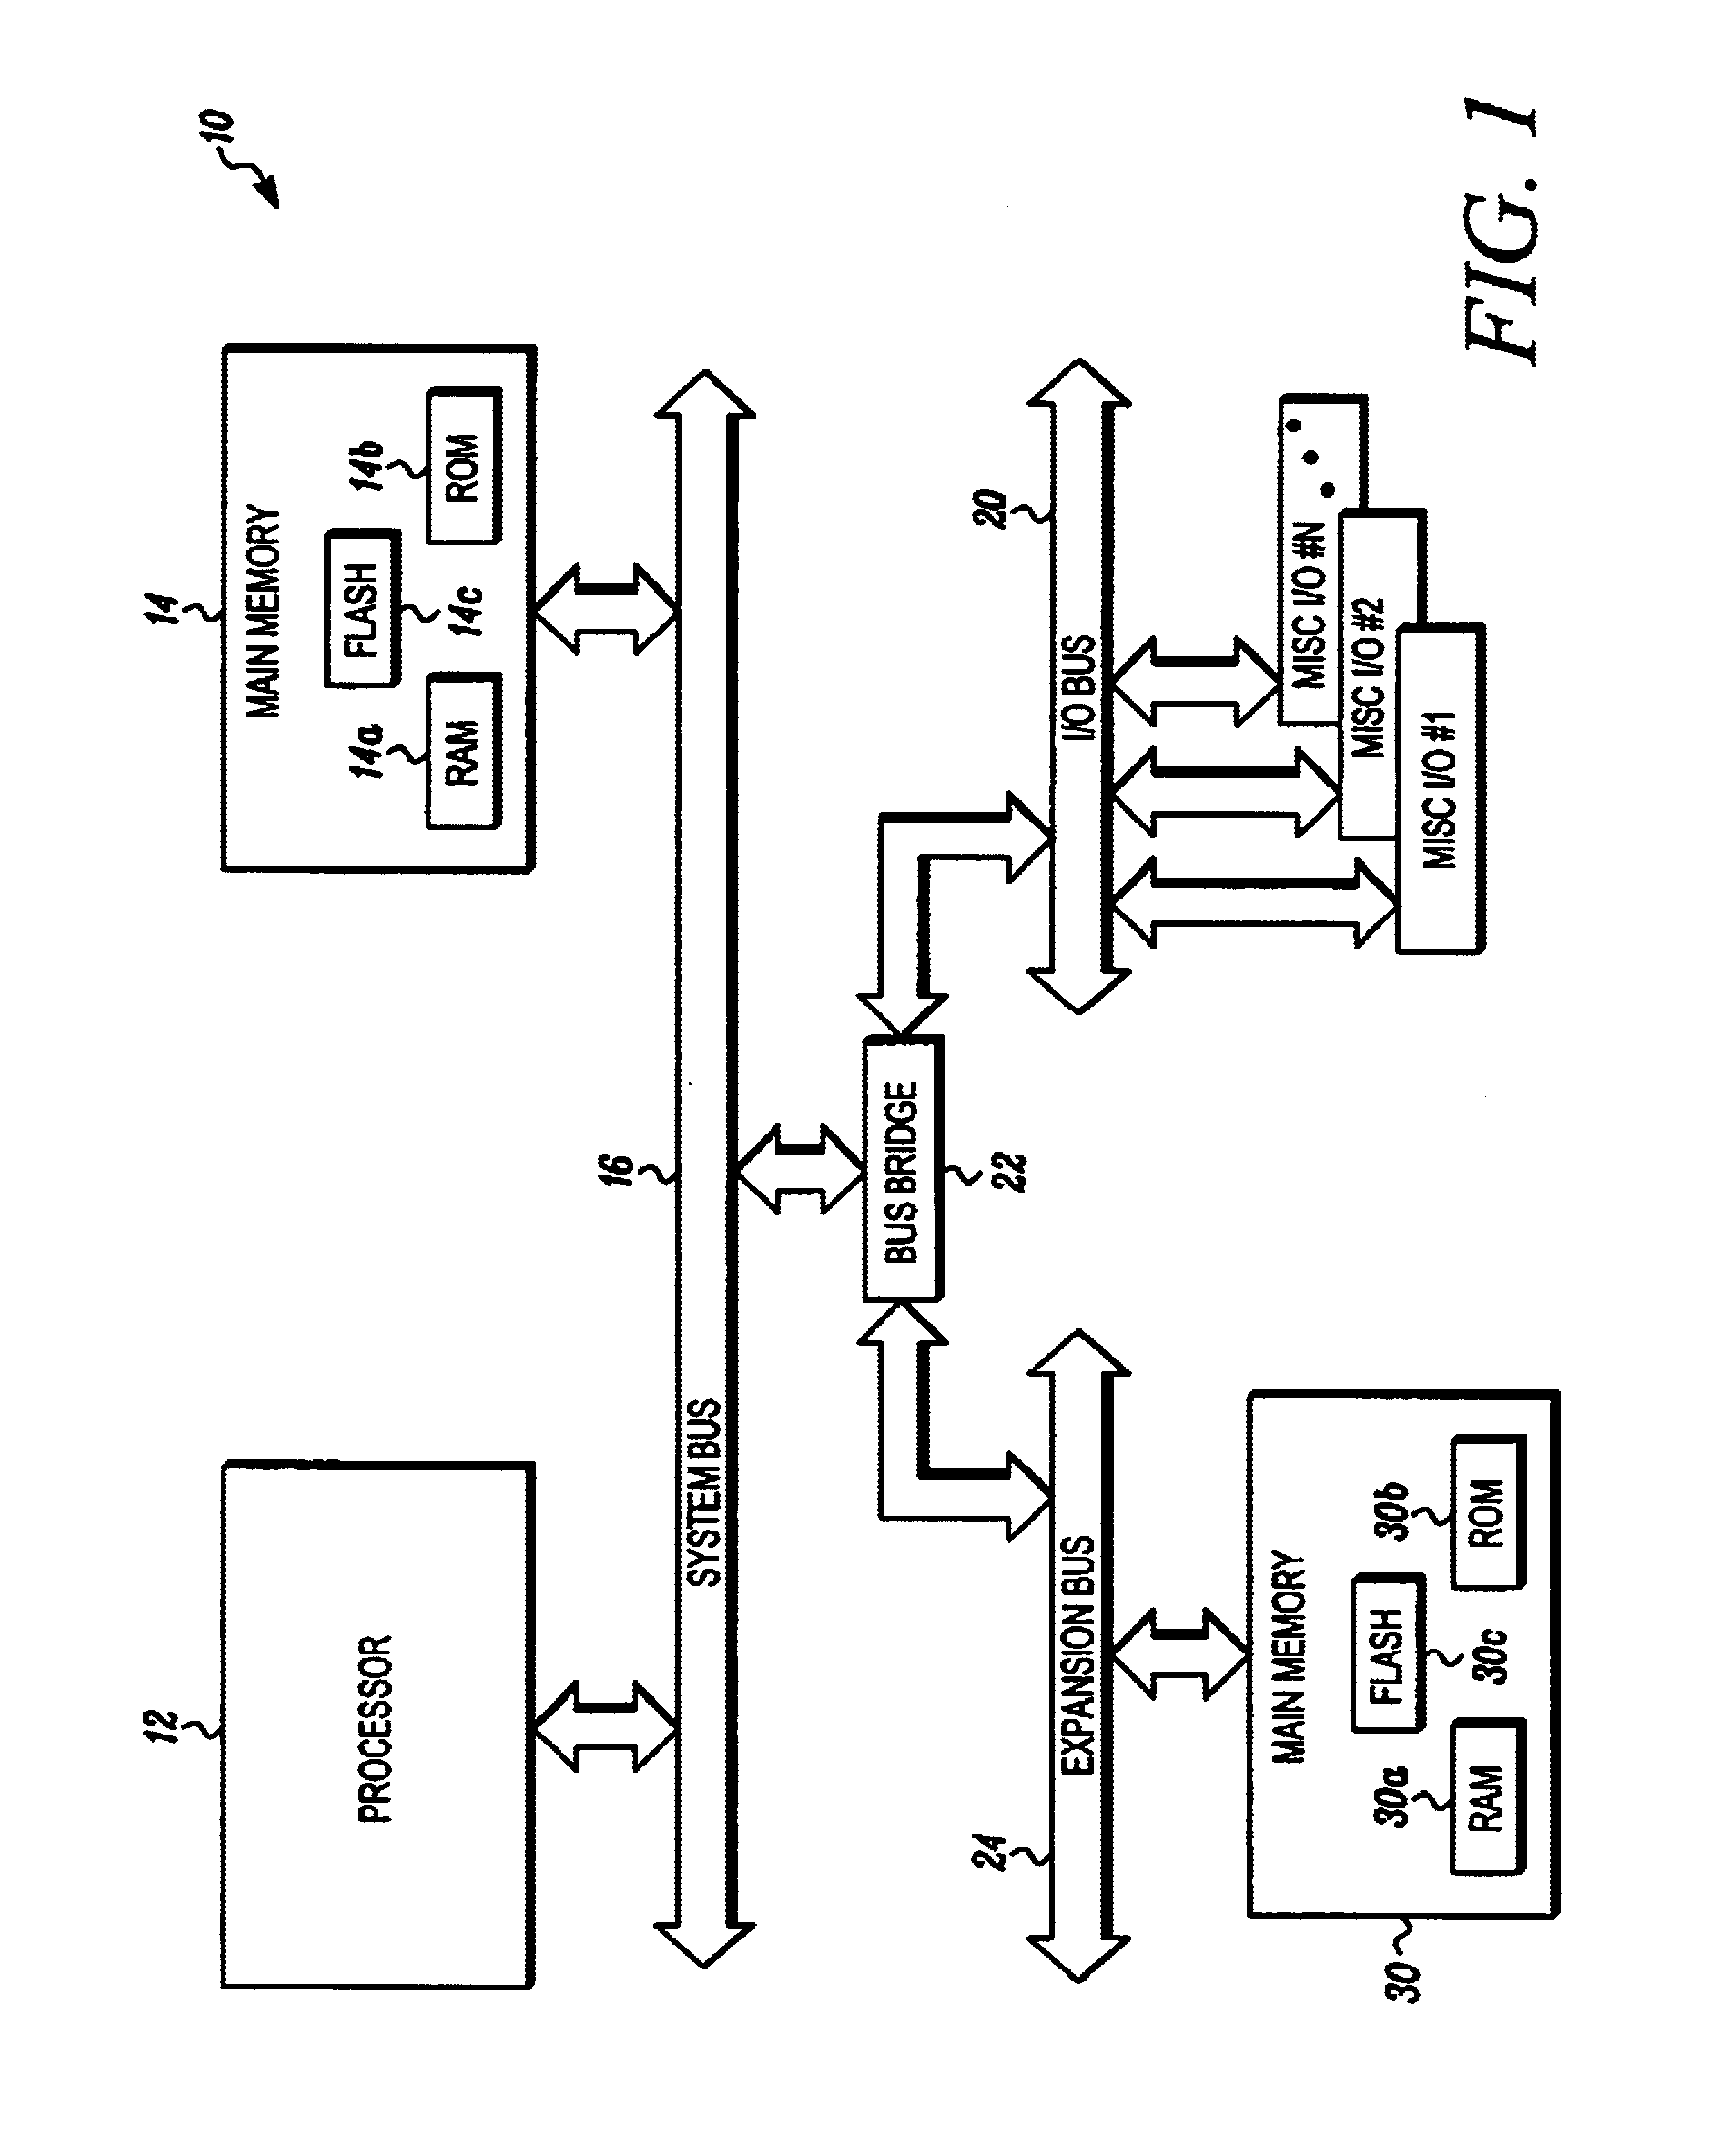 Method and system for providing memory-based device emulation